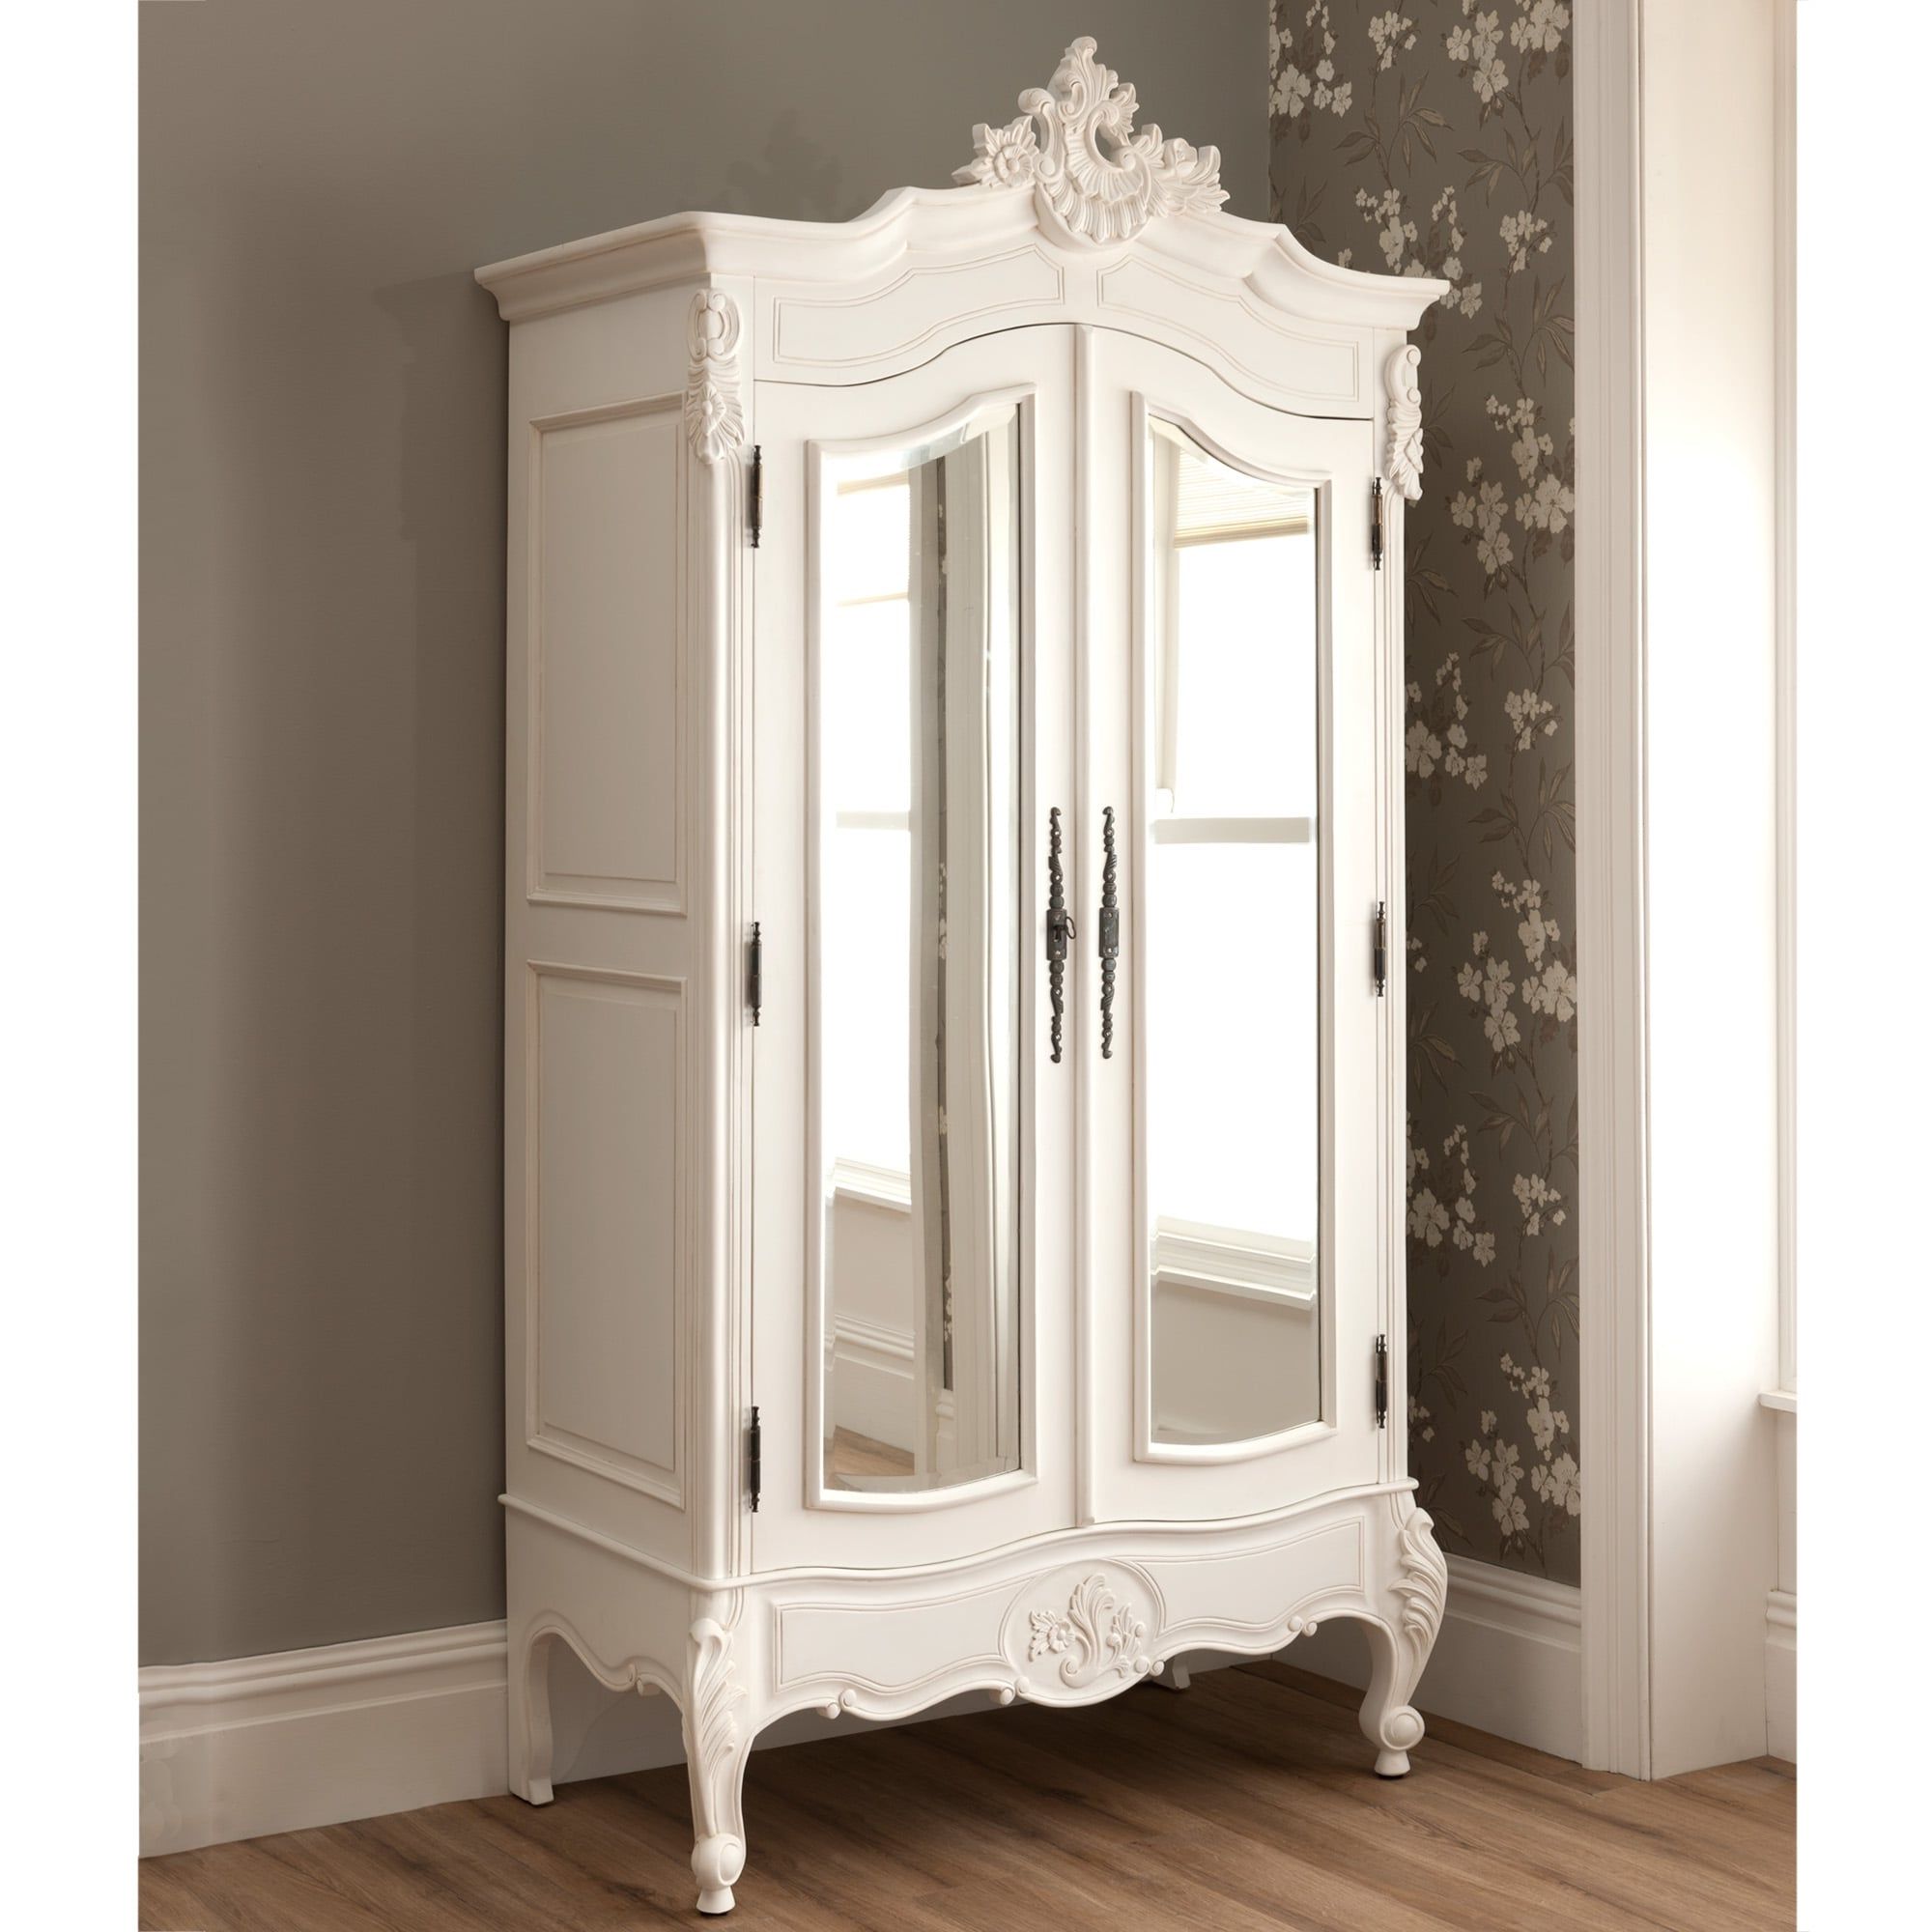 La Rochelle Antique French Mirrored 2 Door Wardrobe Intended For Cheap French Style Wardrobes (Gallery 1 of 20)